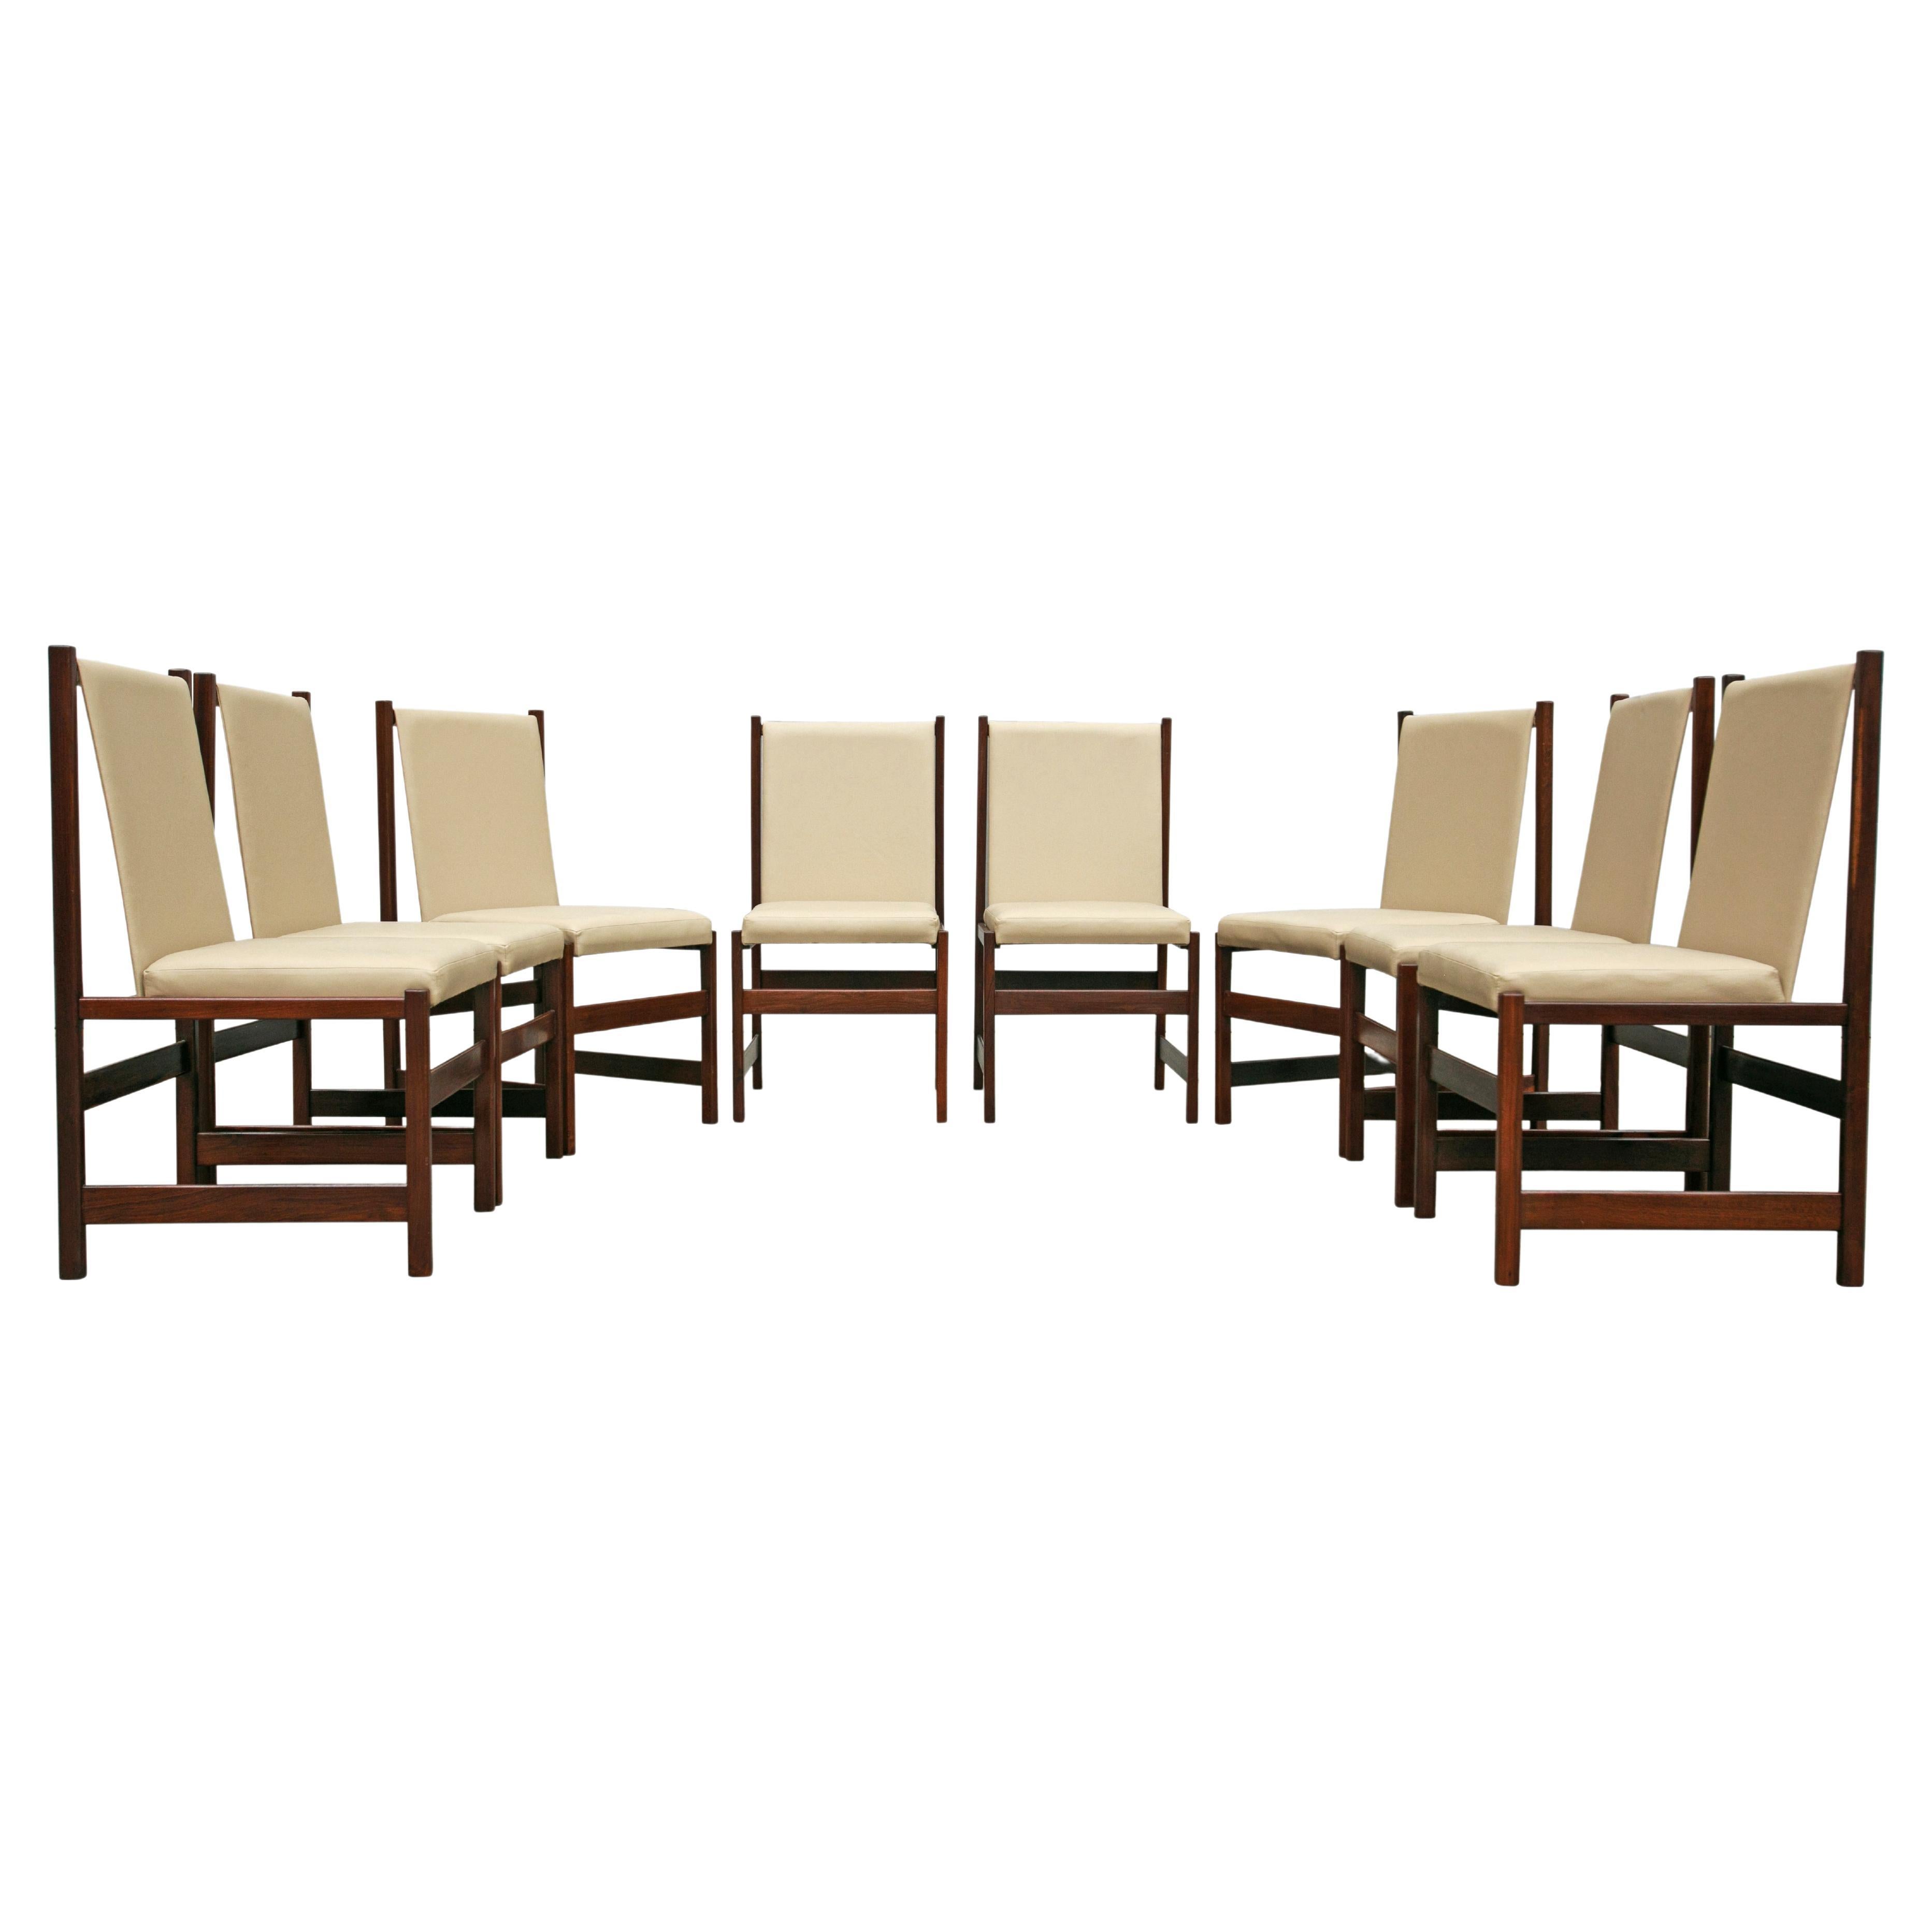 Mid-Century Modern 8 Dining Chair Set in Hardwood&Beige Leather by Celina 1960s